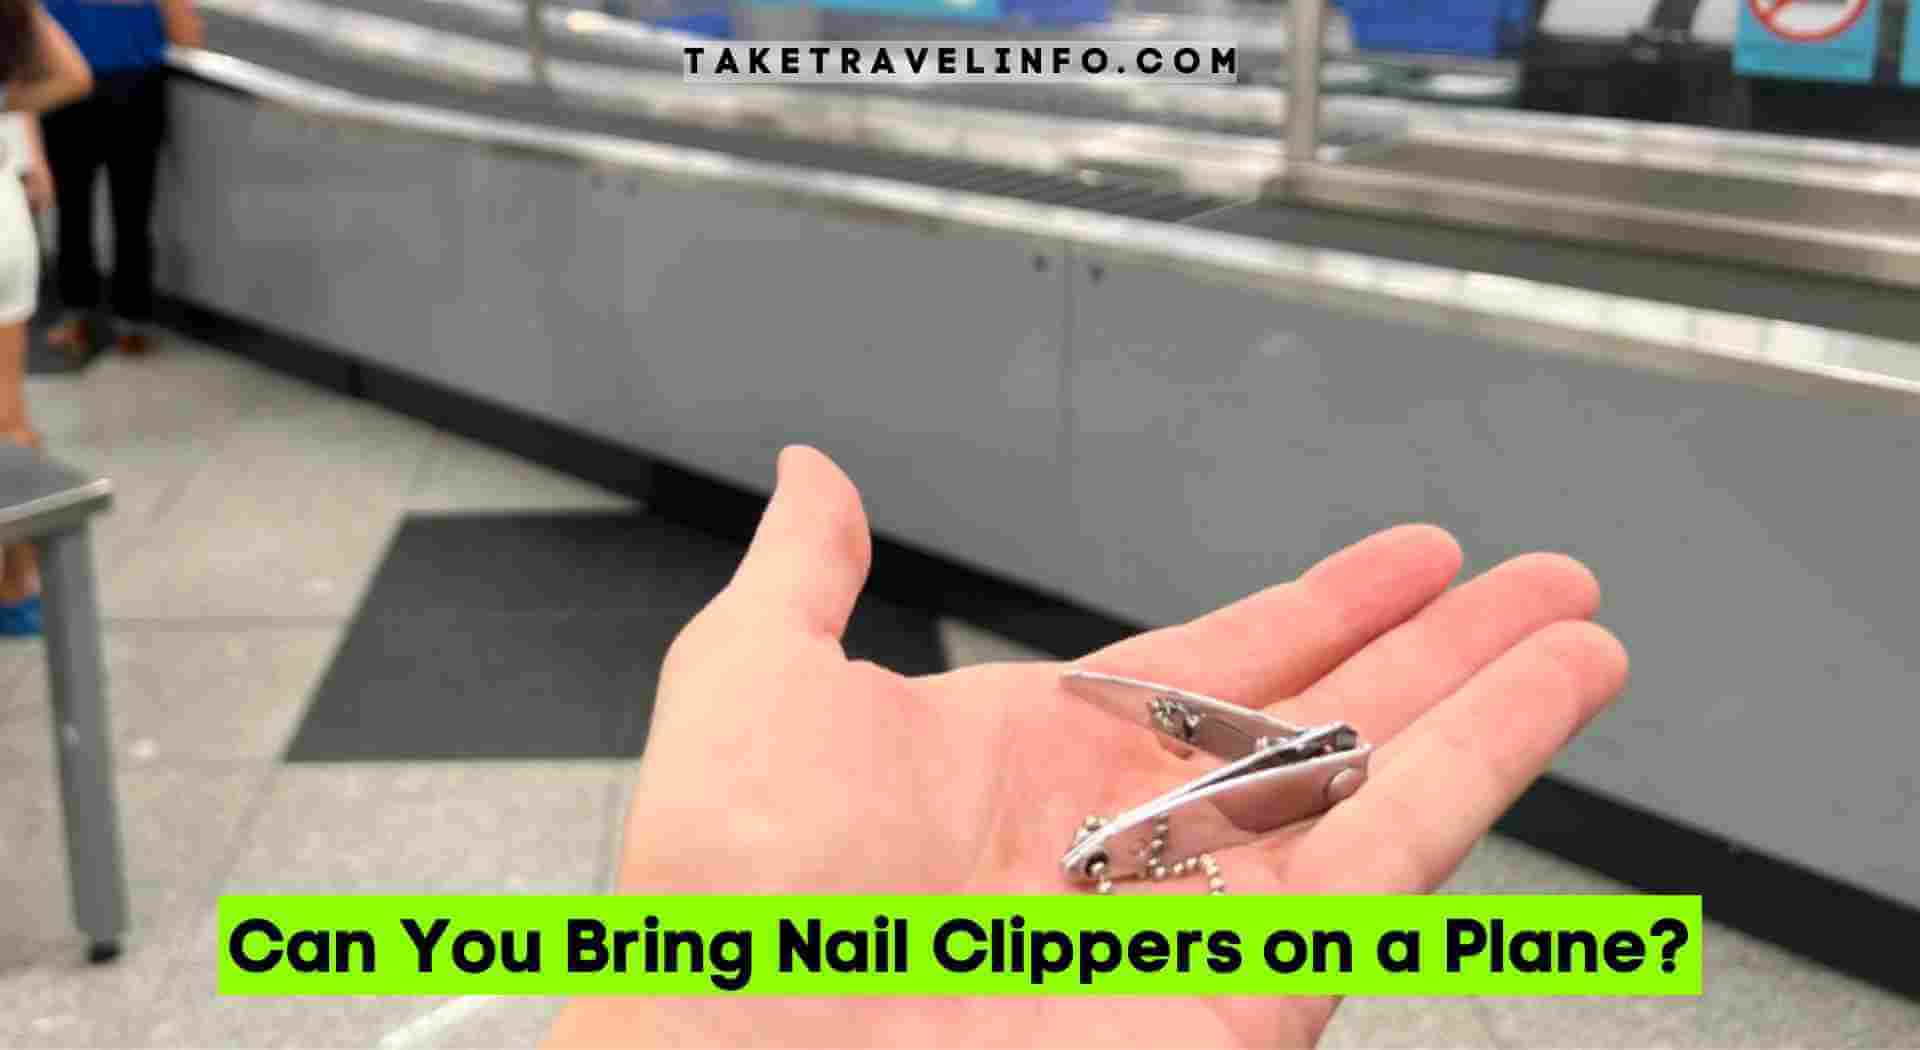 Can You Bring Nail Clippers on a Plane